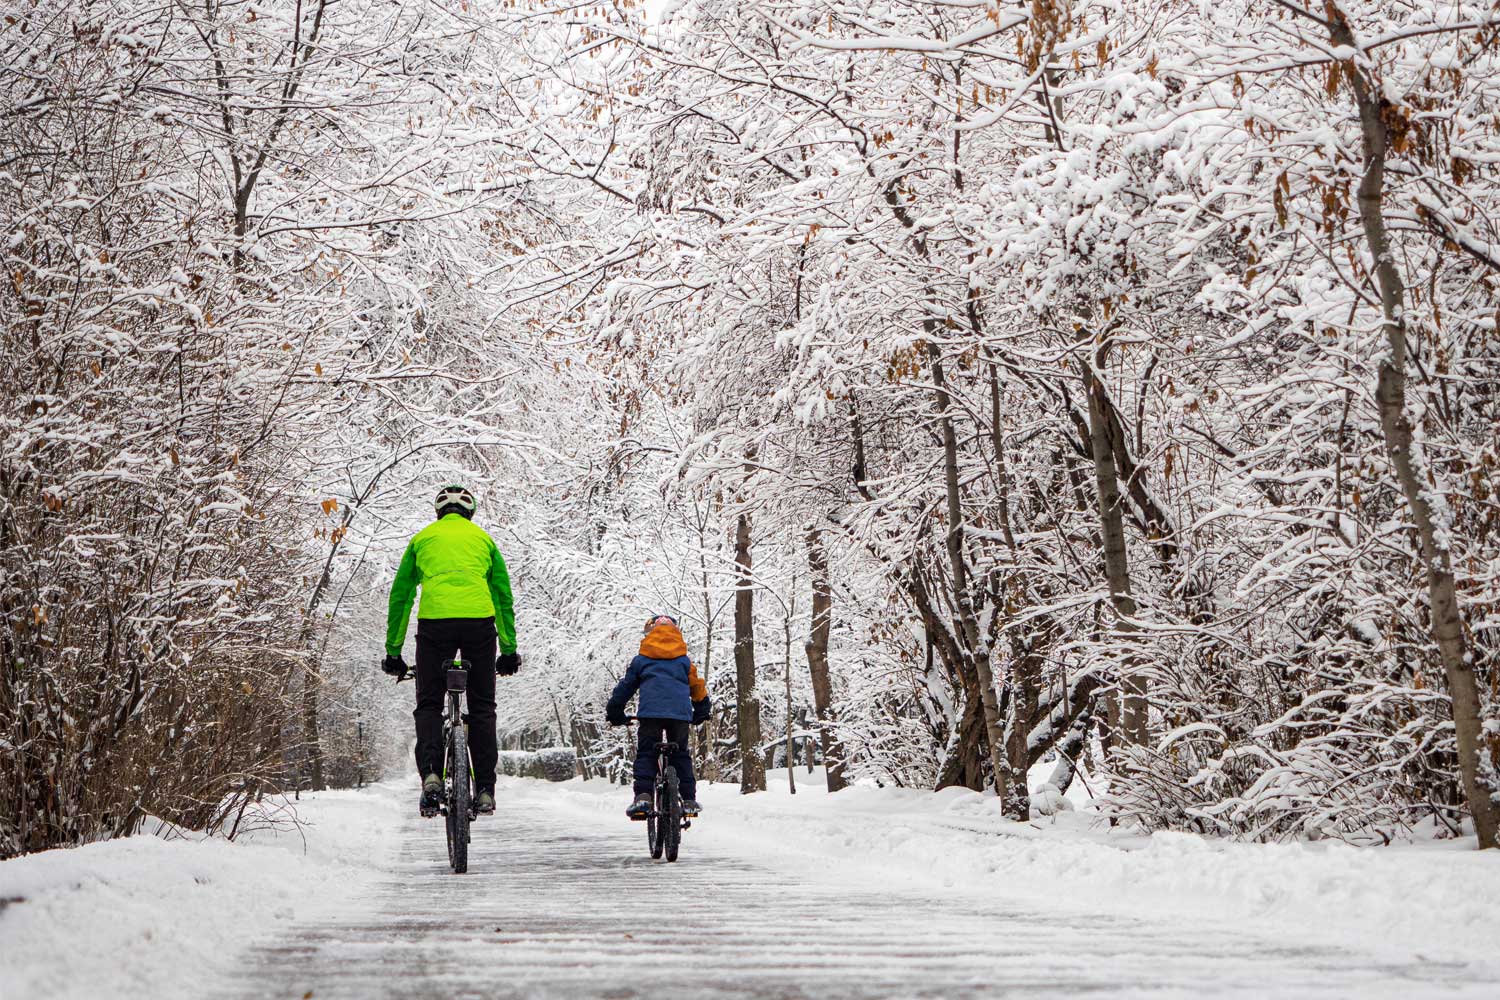 People riding bikes on a paved trail through snow covered trees.